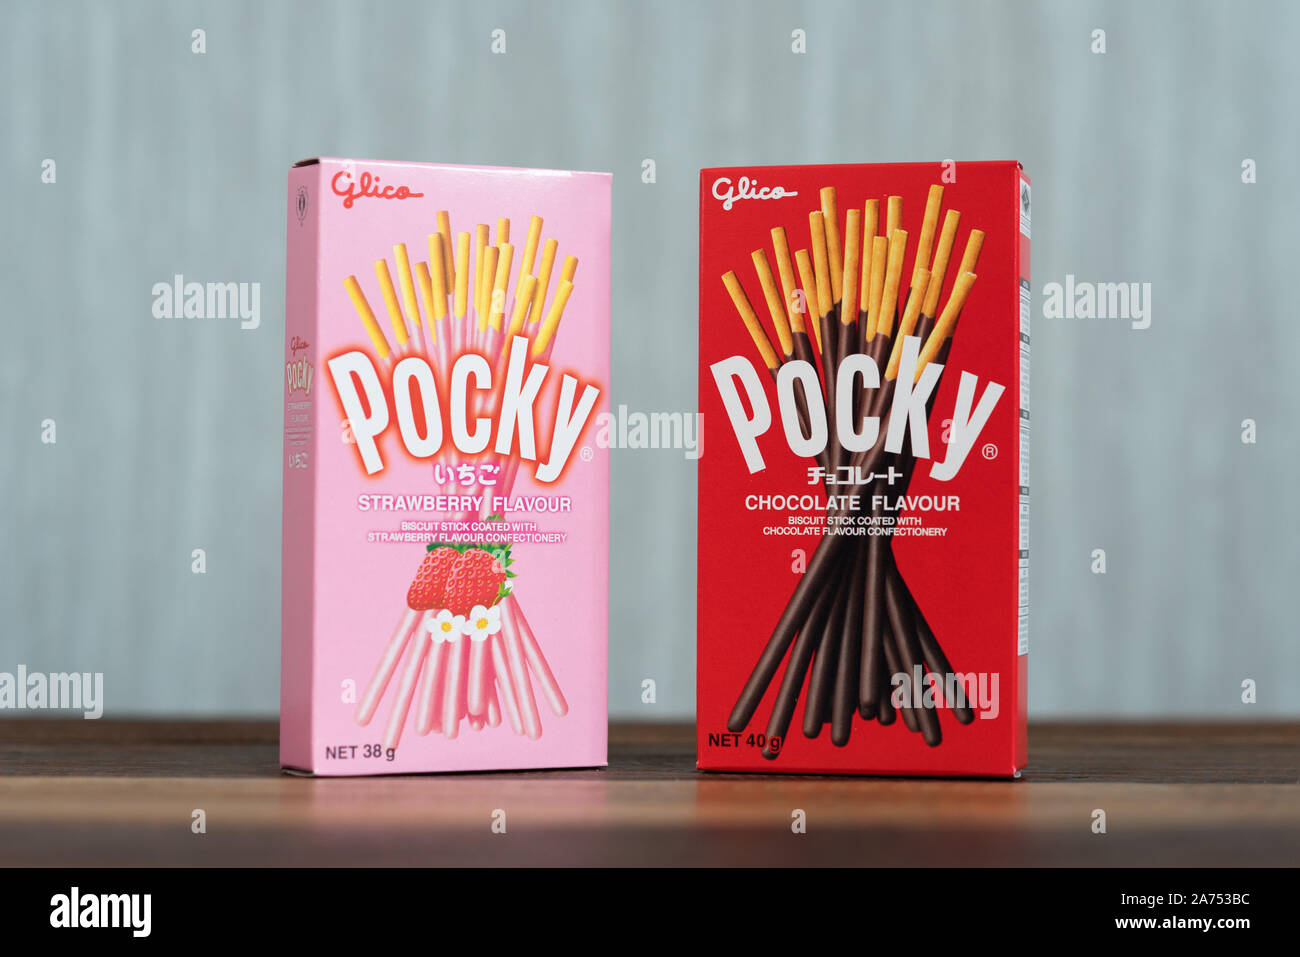 Petaling jaya, Selangor, Malaysia - 20 Oktober 2019 : Pocky brand of chocolate sticks on wooden table. Pocky is a famous confectionery among asian peo Stock Photo